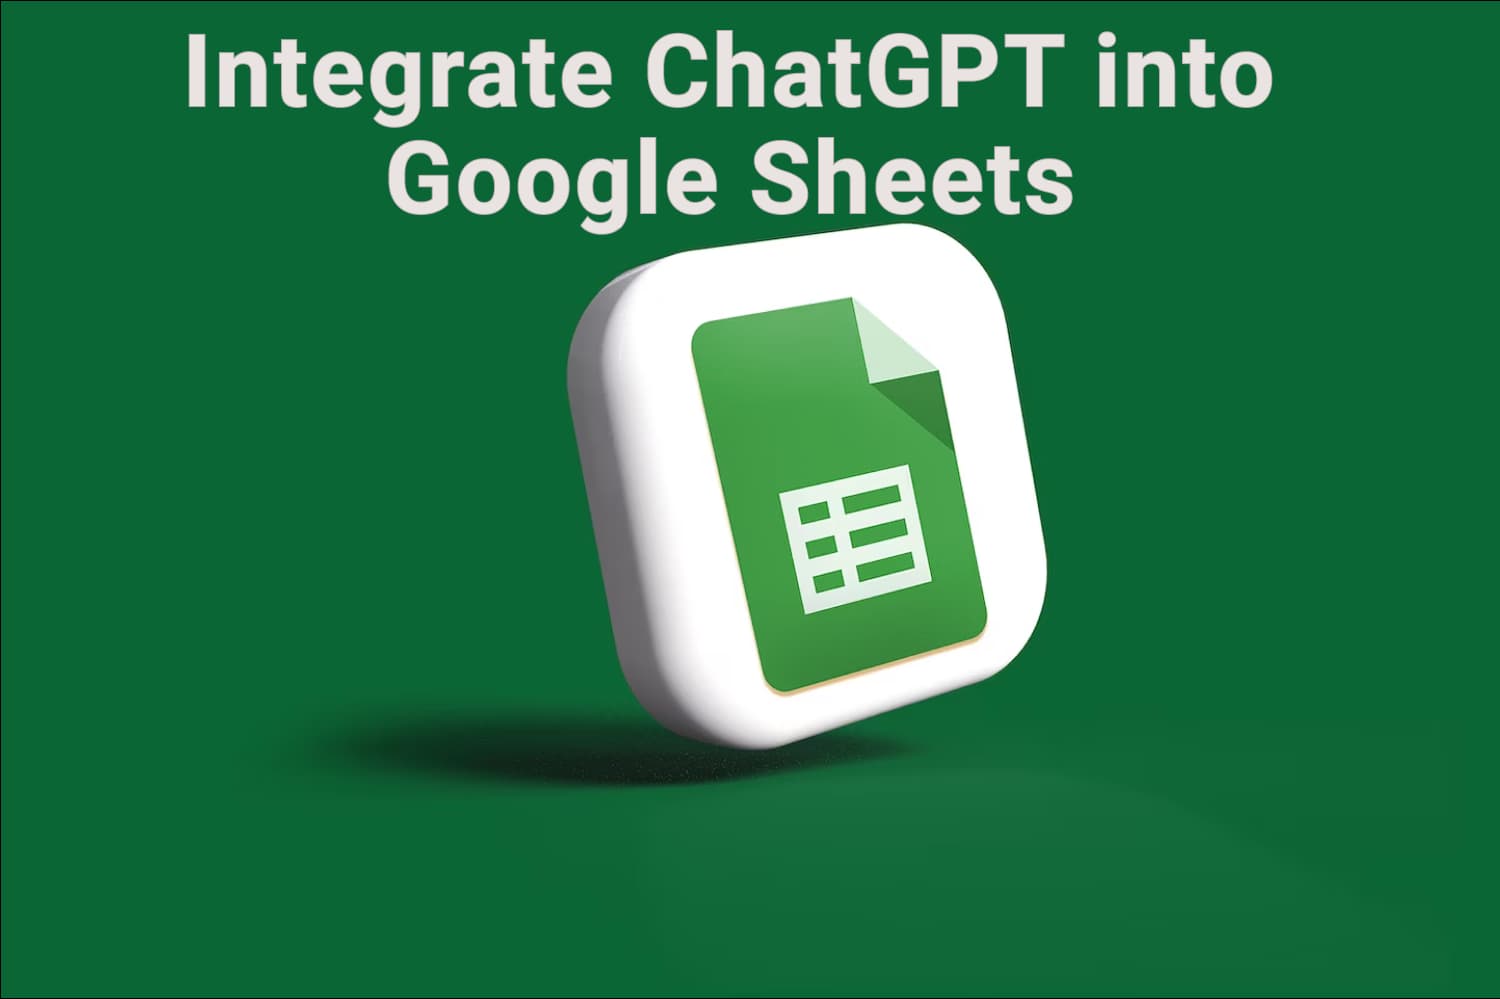 How to Use ChatGPT in Google Sheets